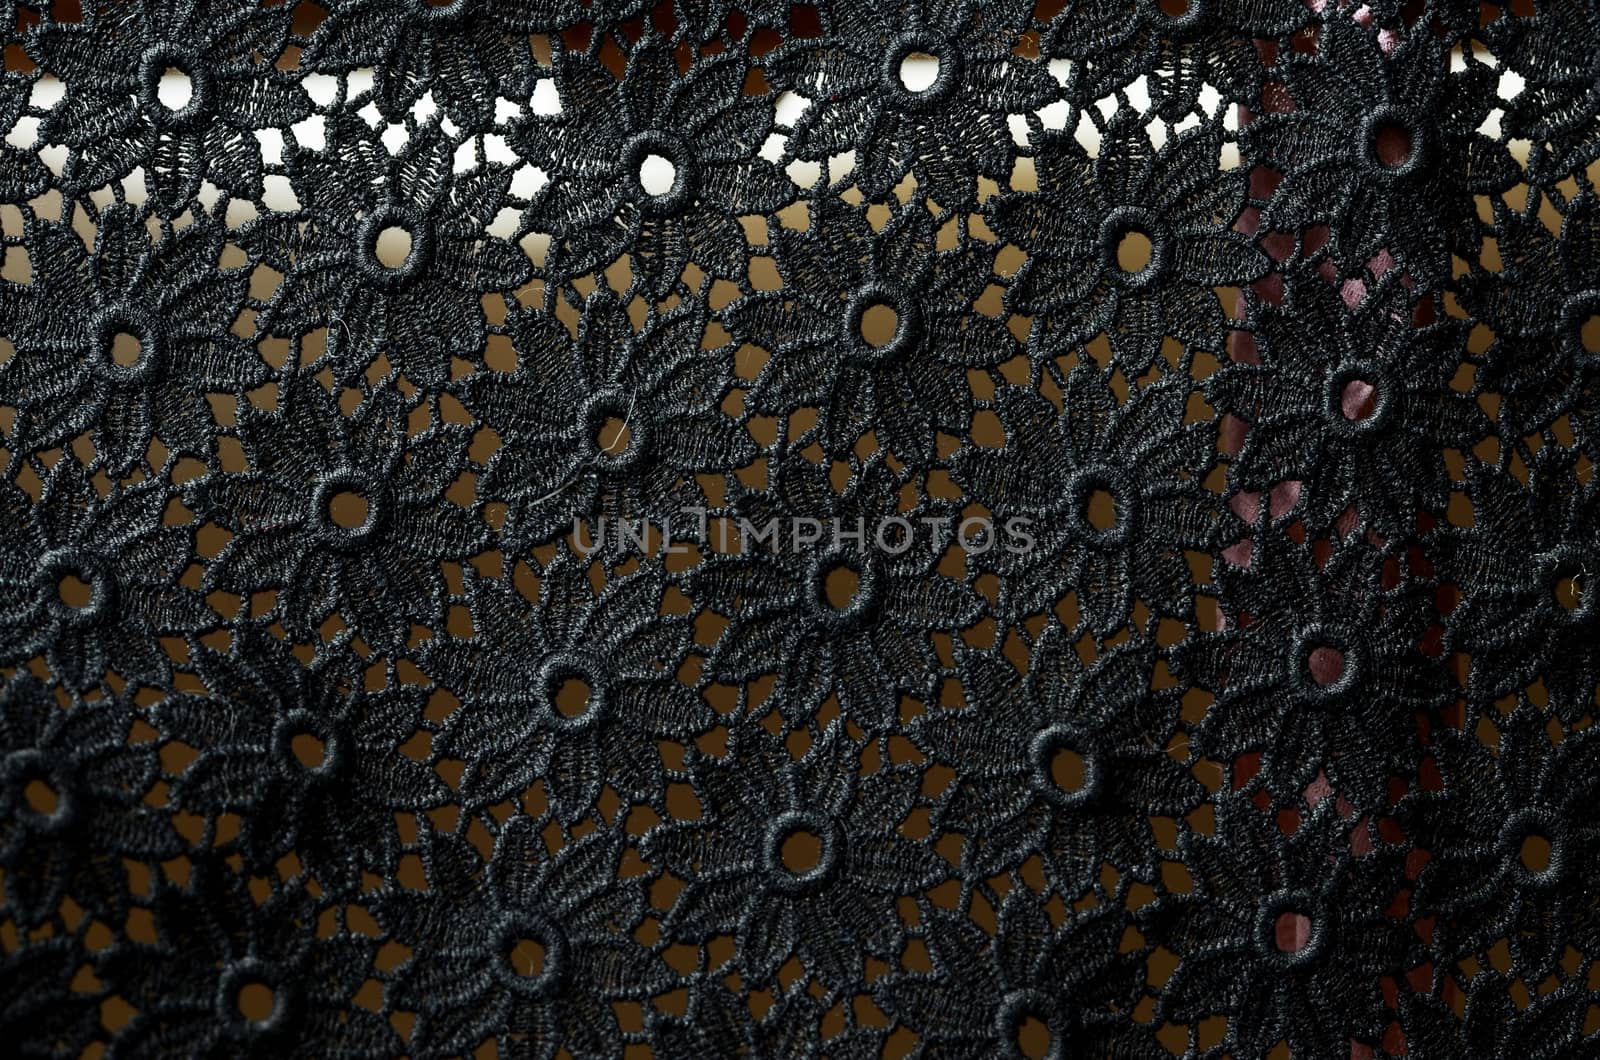 lace fabric by sarkao